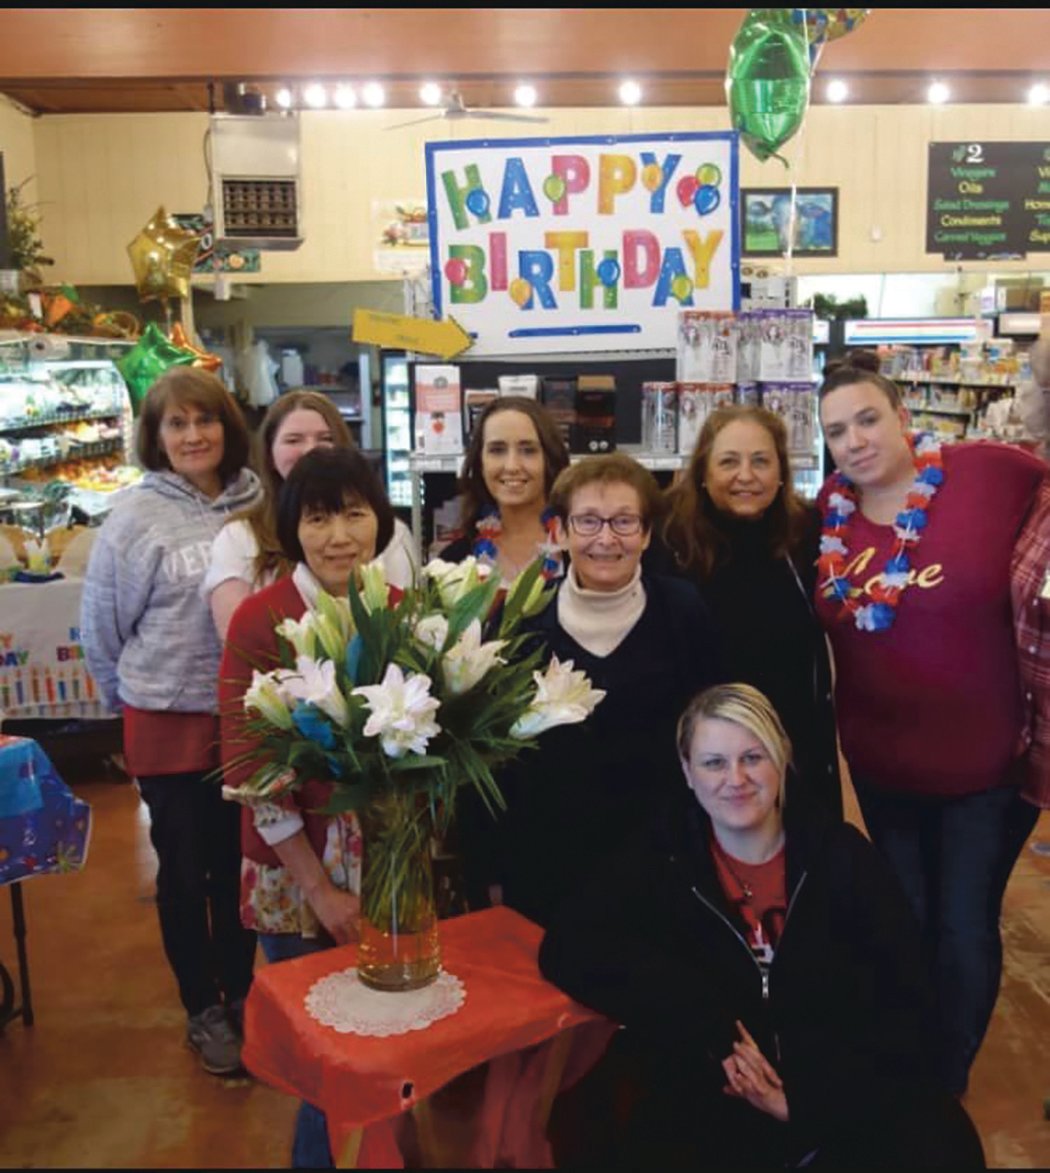 The Yelm Food Co-op celebrated its 15th birthday on Wednesday, April 27.